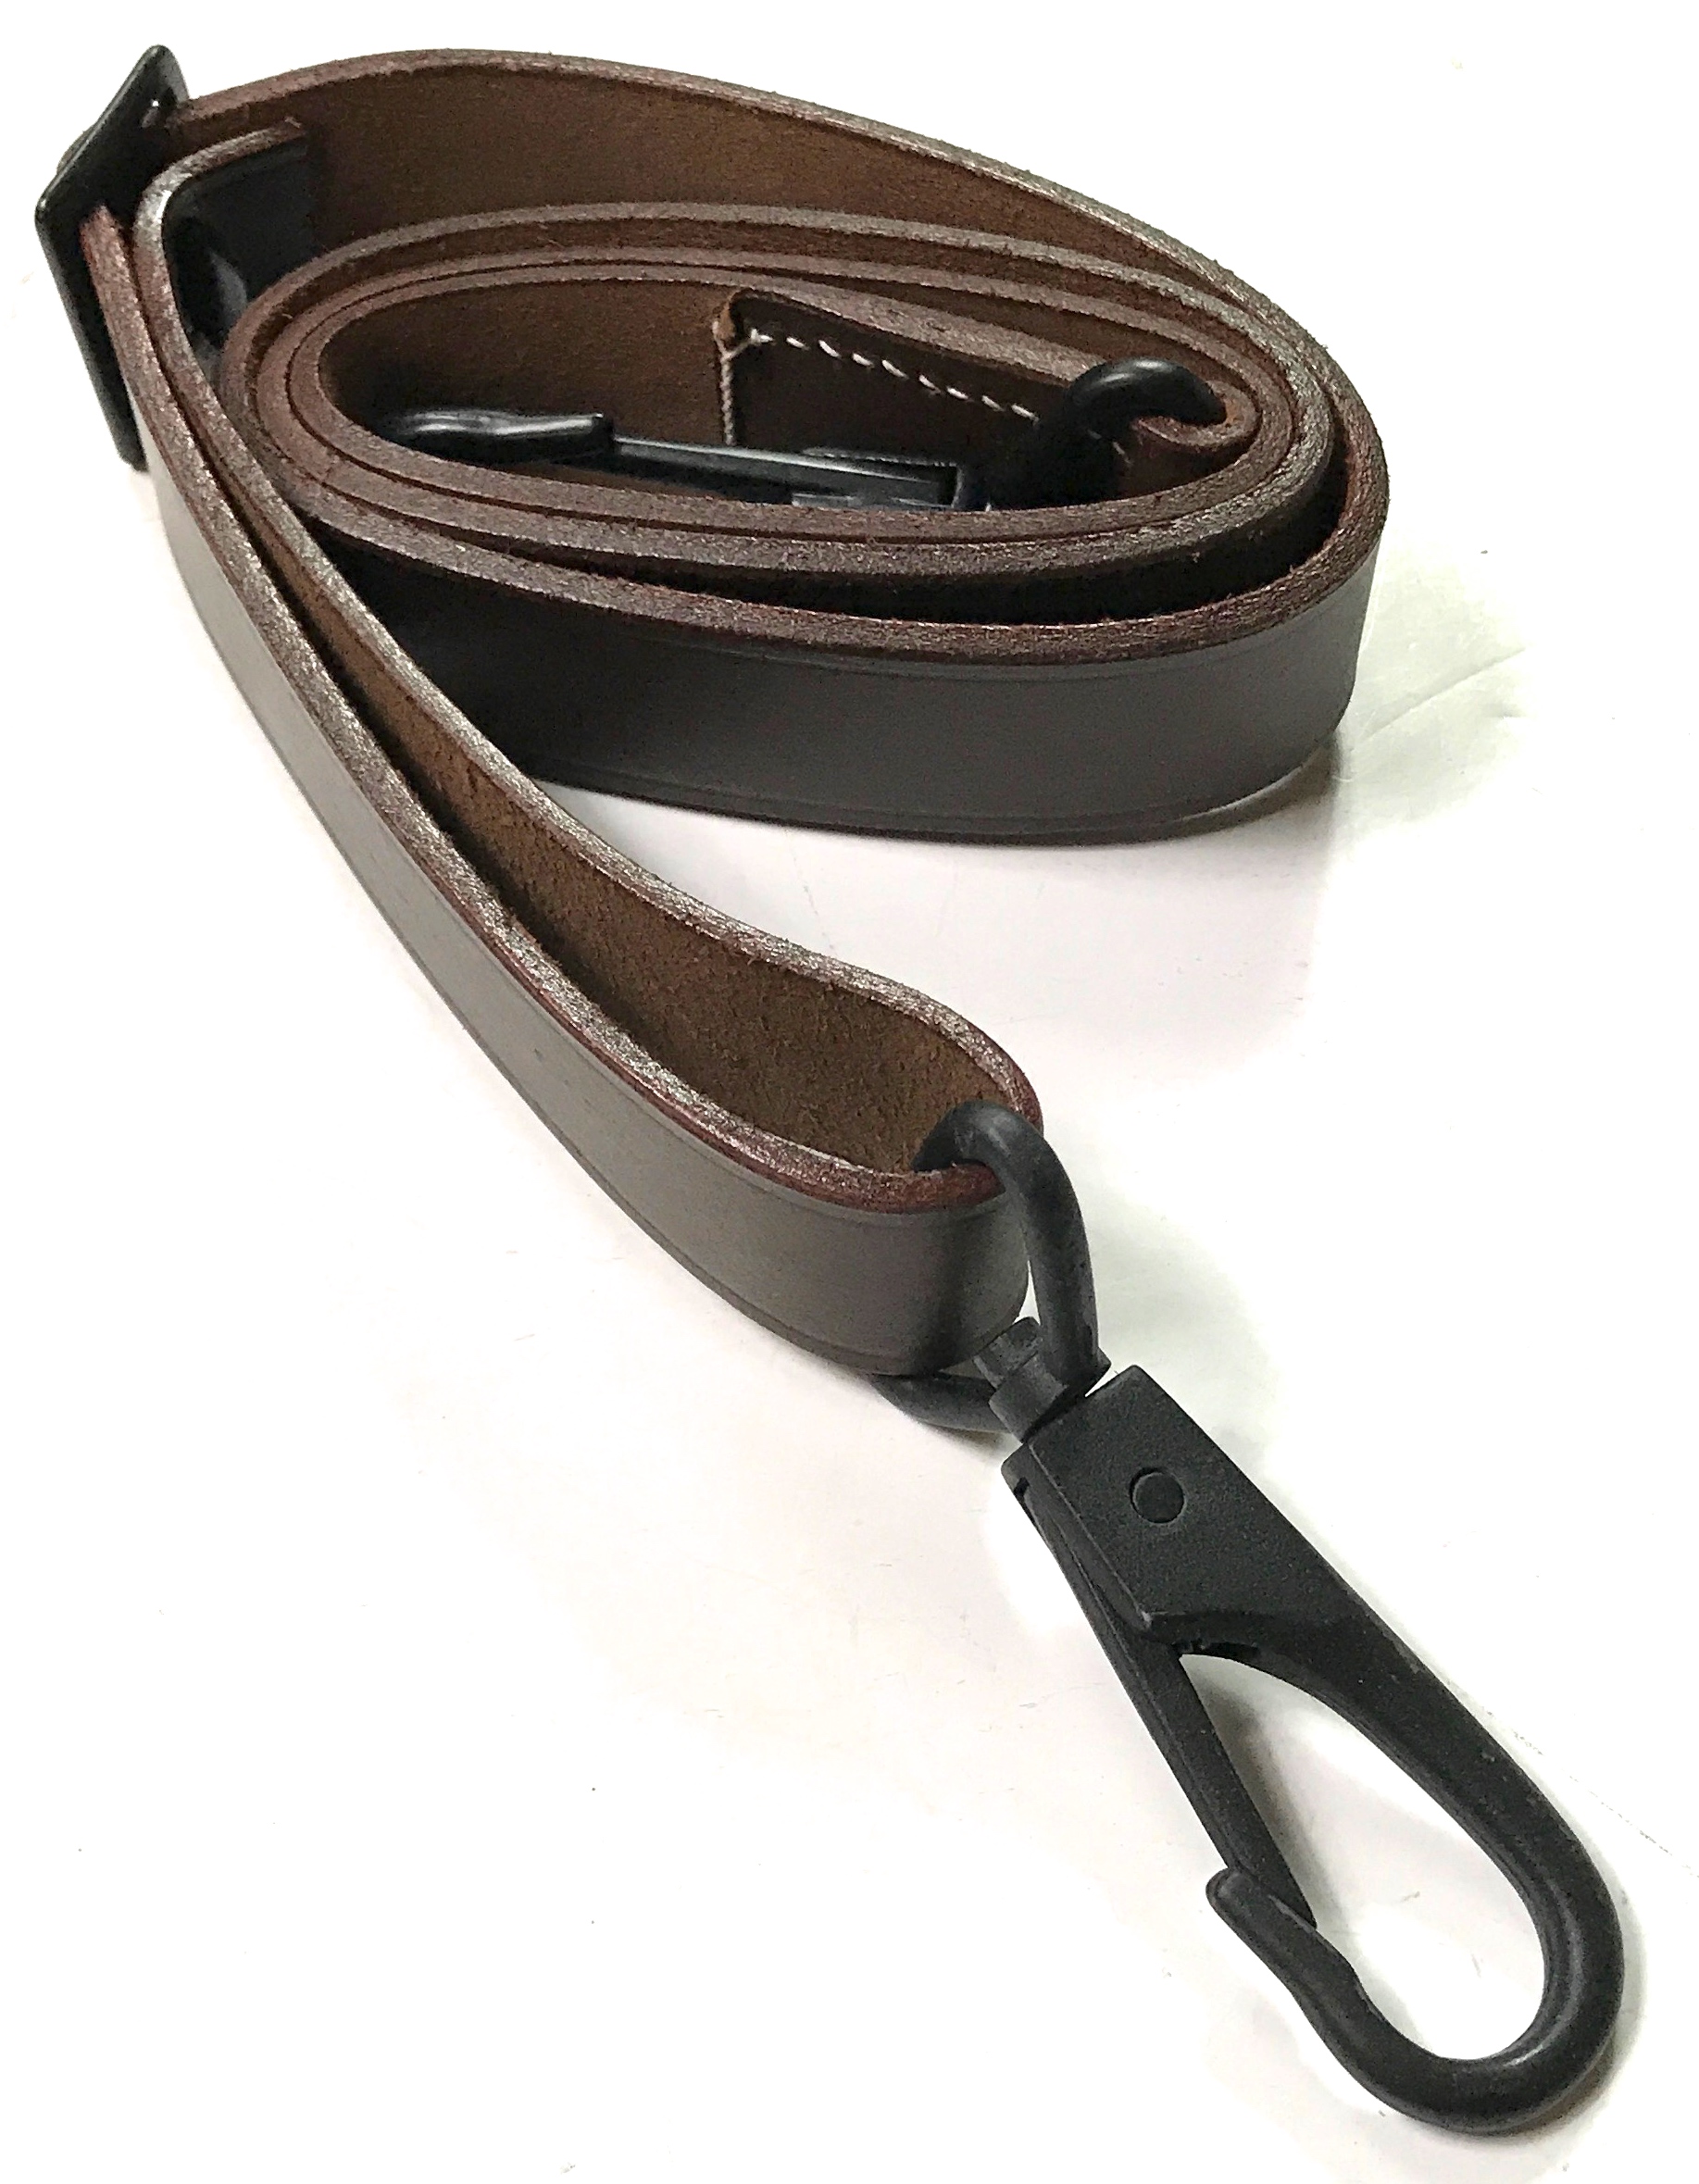 ZB26 ZB30 MG 26(t) LEATHER CARRY SLING | Man The Line